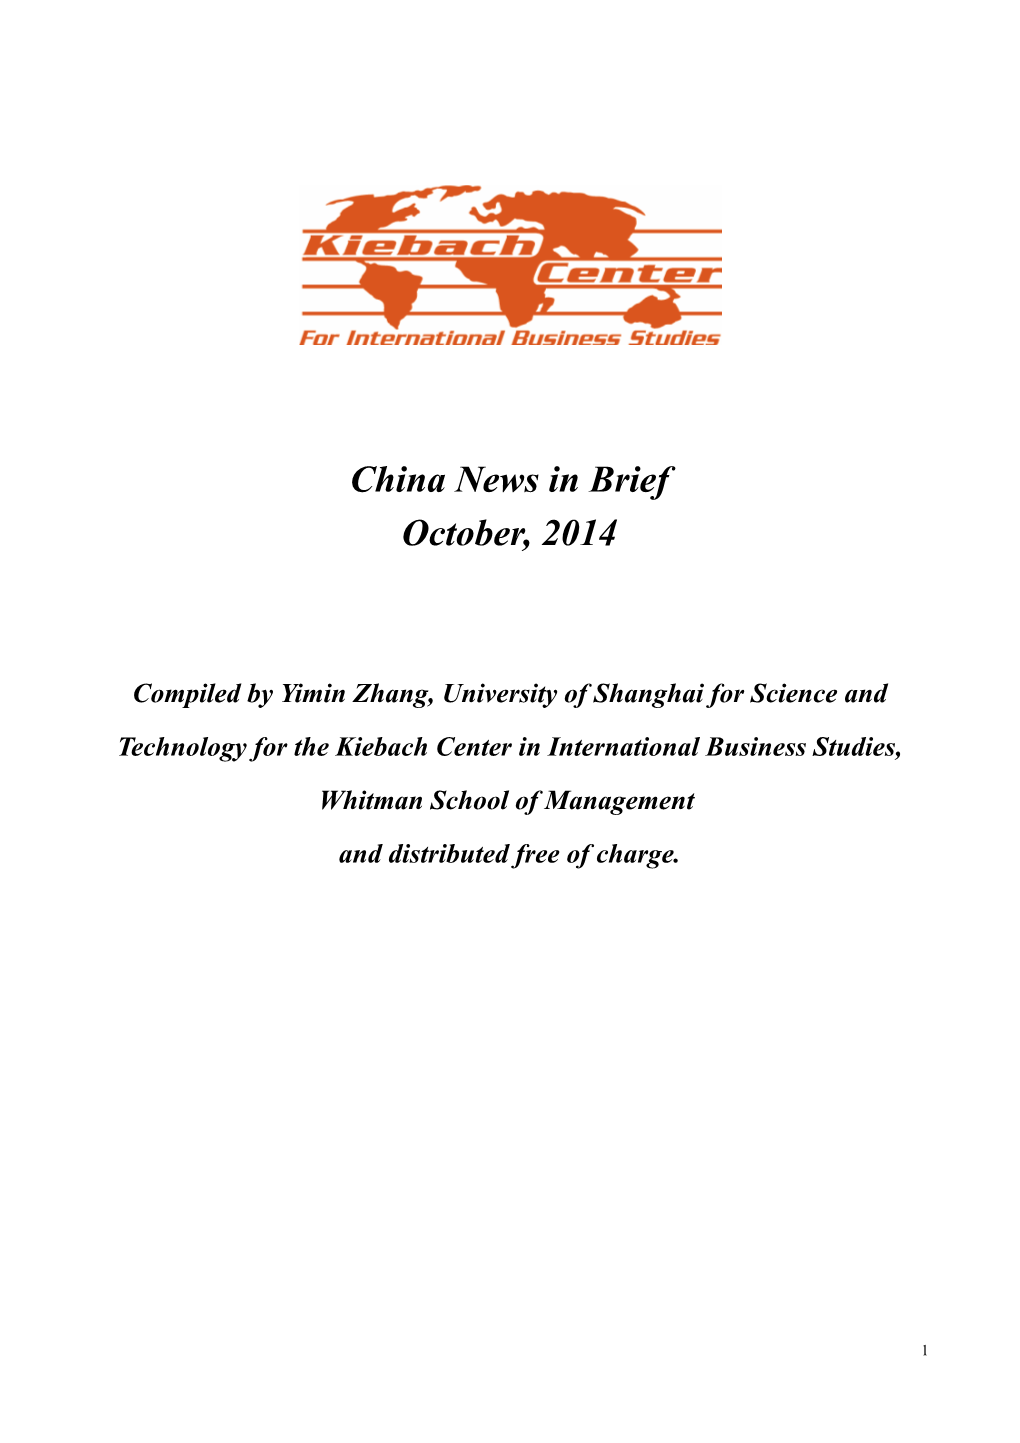 China News in Brief